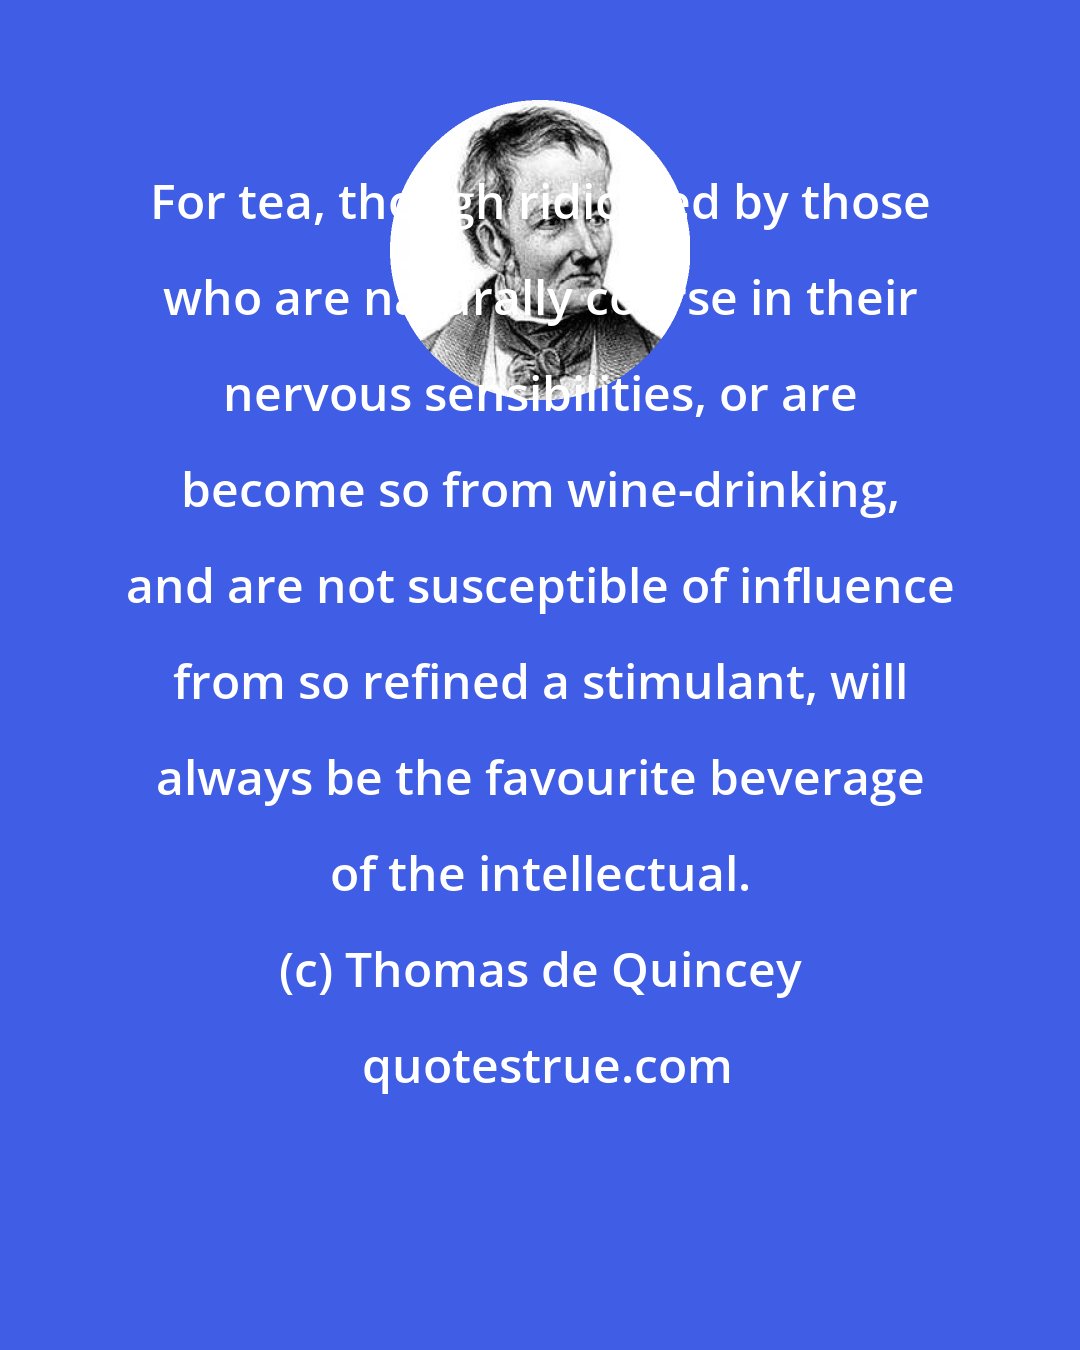 Thomas de Quincey: For tea, though ridiculed by those who are naturally coarse in their nervous sensibilities, or are become so from wine-drinking, and are not susceptible of influence from so refined a stimulant, will always be the favourite beverage of the intellectual.